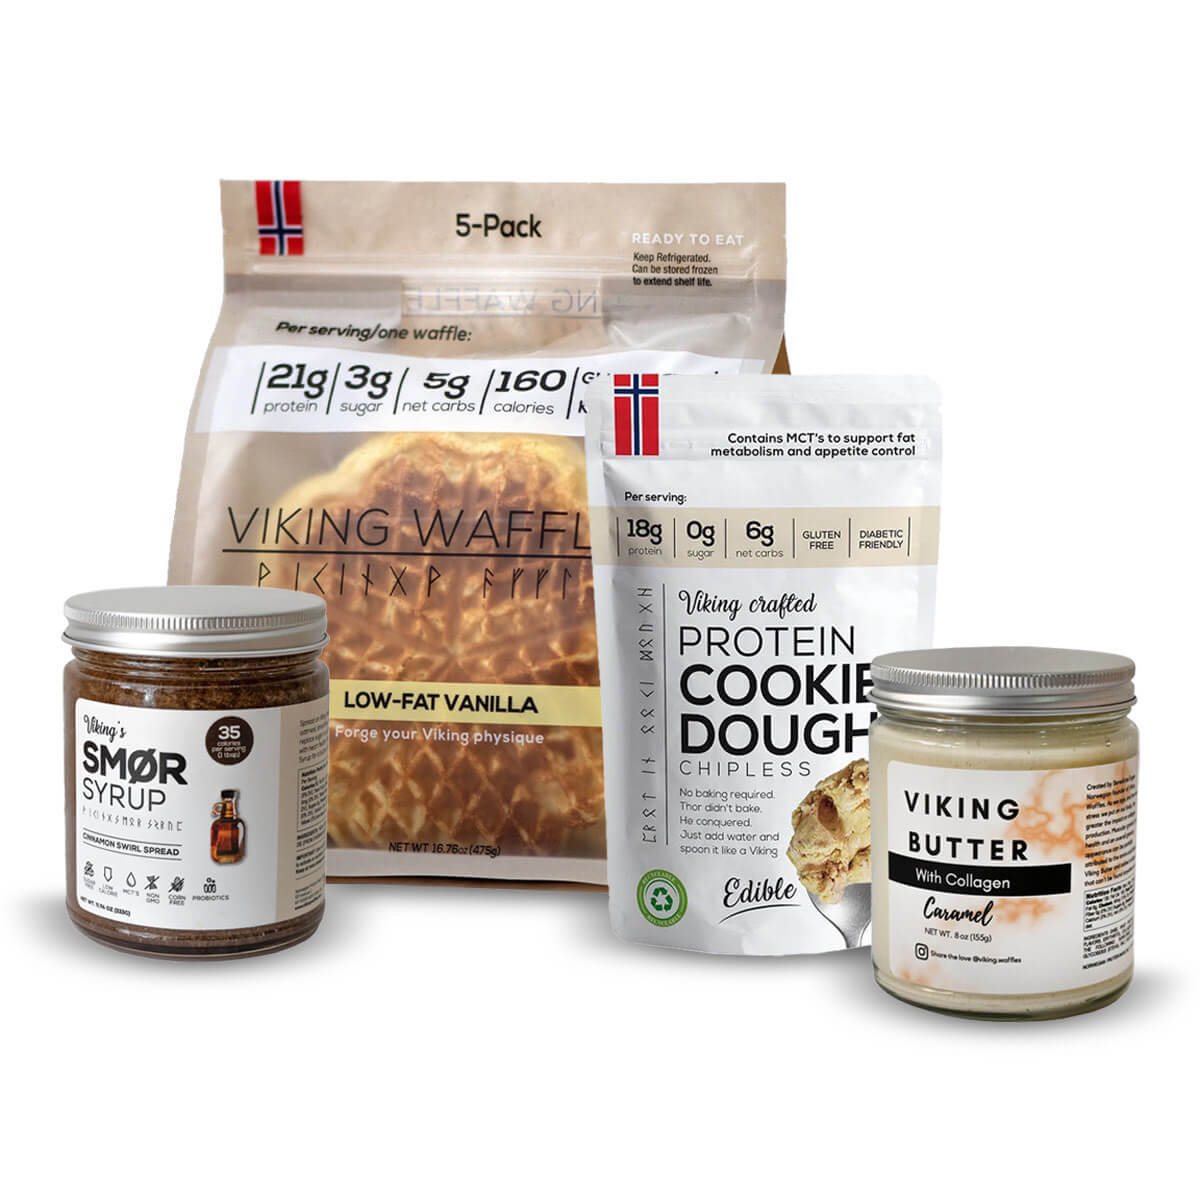 Product shot showing 4 Viking Waffles products.  From left to right: a jar of Smør syrup, a bag of low-fat vanilla wafers, protein cookie dough, and a jar of caramel viking butter with collagen.  All products have brand labels and clearly highlight nutritional information such as protein, sugar, carbohydrates and calories in bold. 